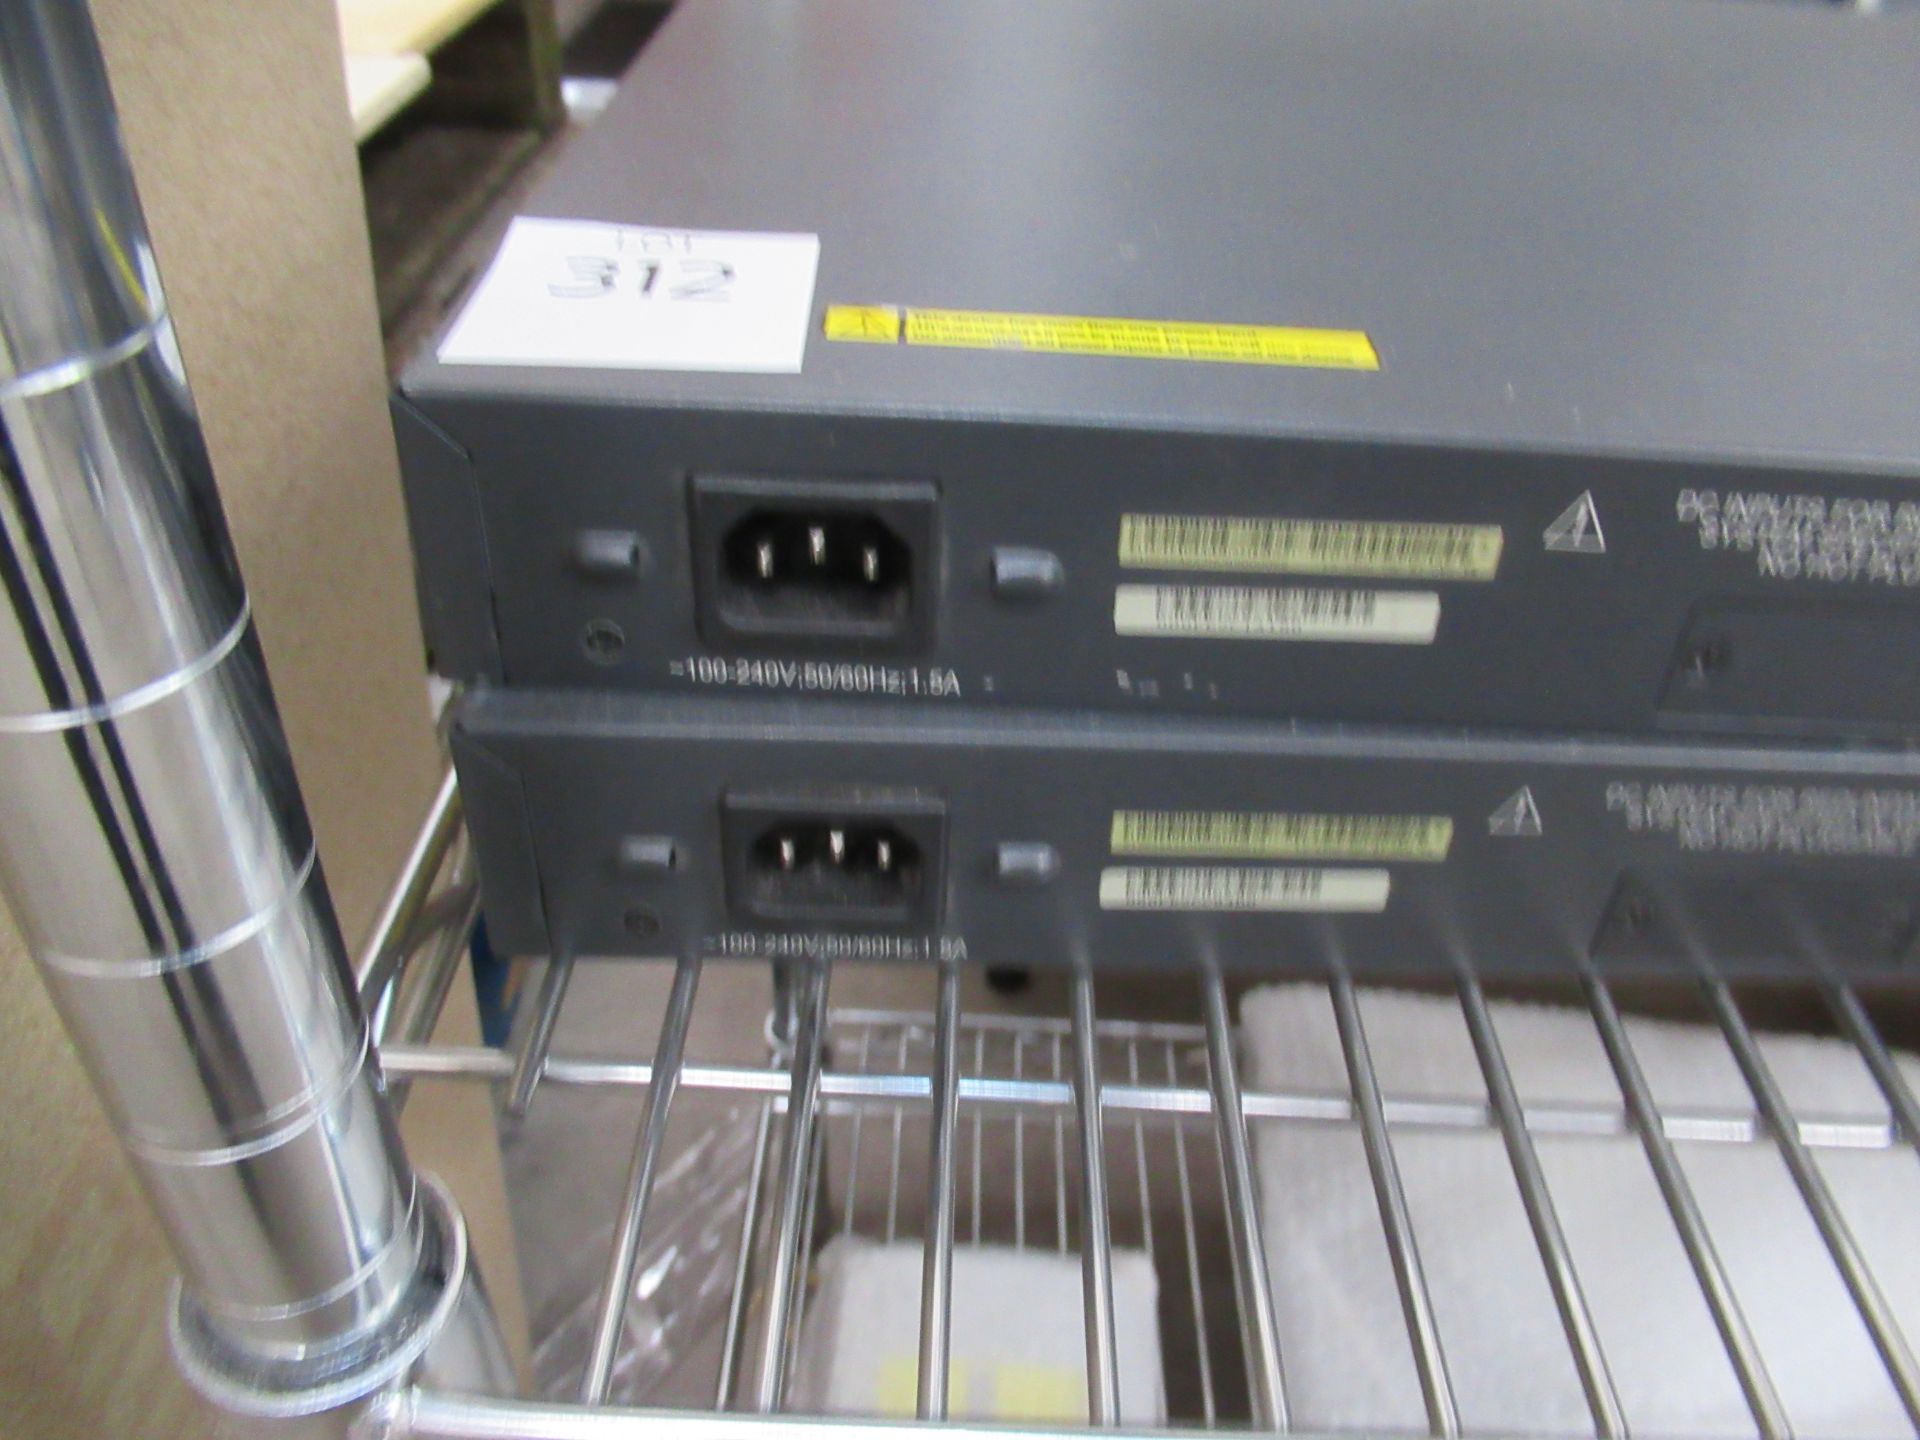 2 x Brocade AP7420 Switch, 2 x H3C S550 Series Ethernet Switch with CX4 Coupling Cable, 3 x - Image 9 of 38